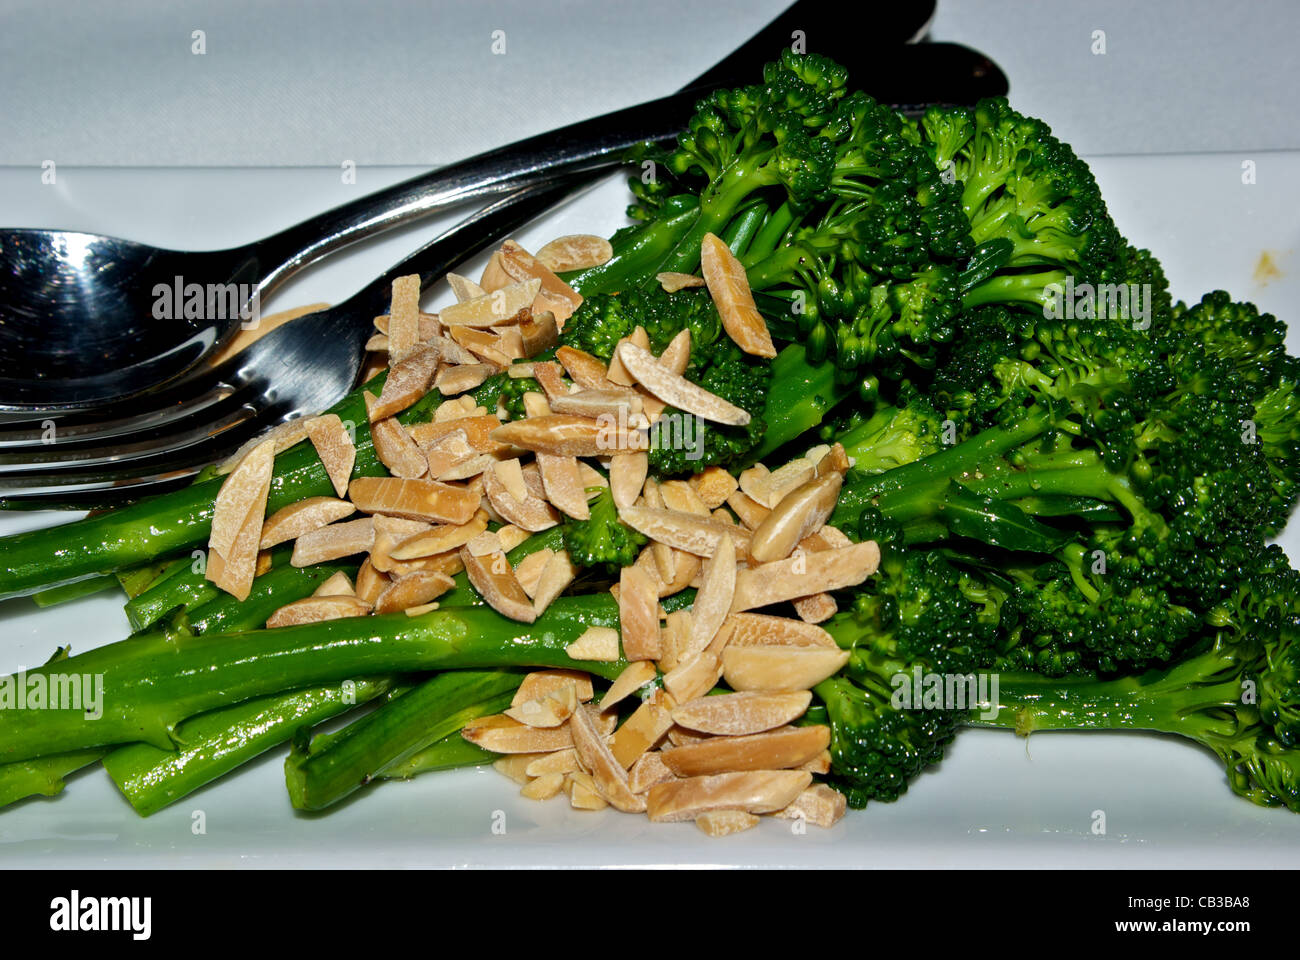 Steamed broccolini vegetable side dish with toasted slivered almonds Stock Photo